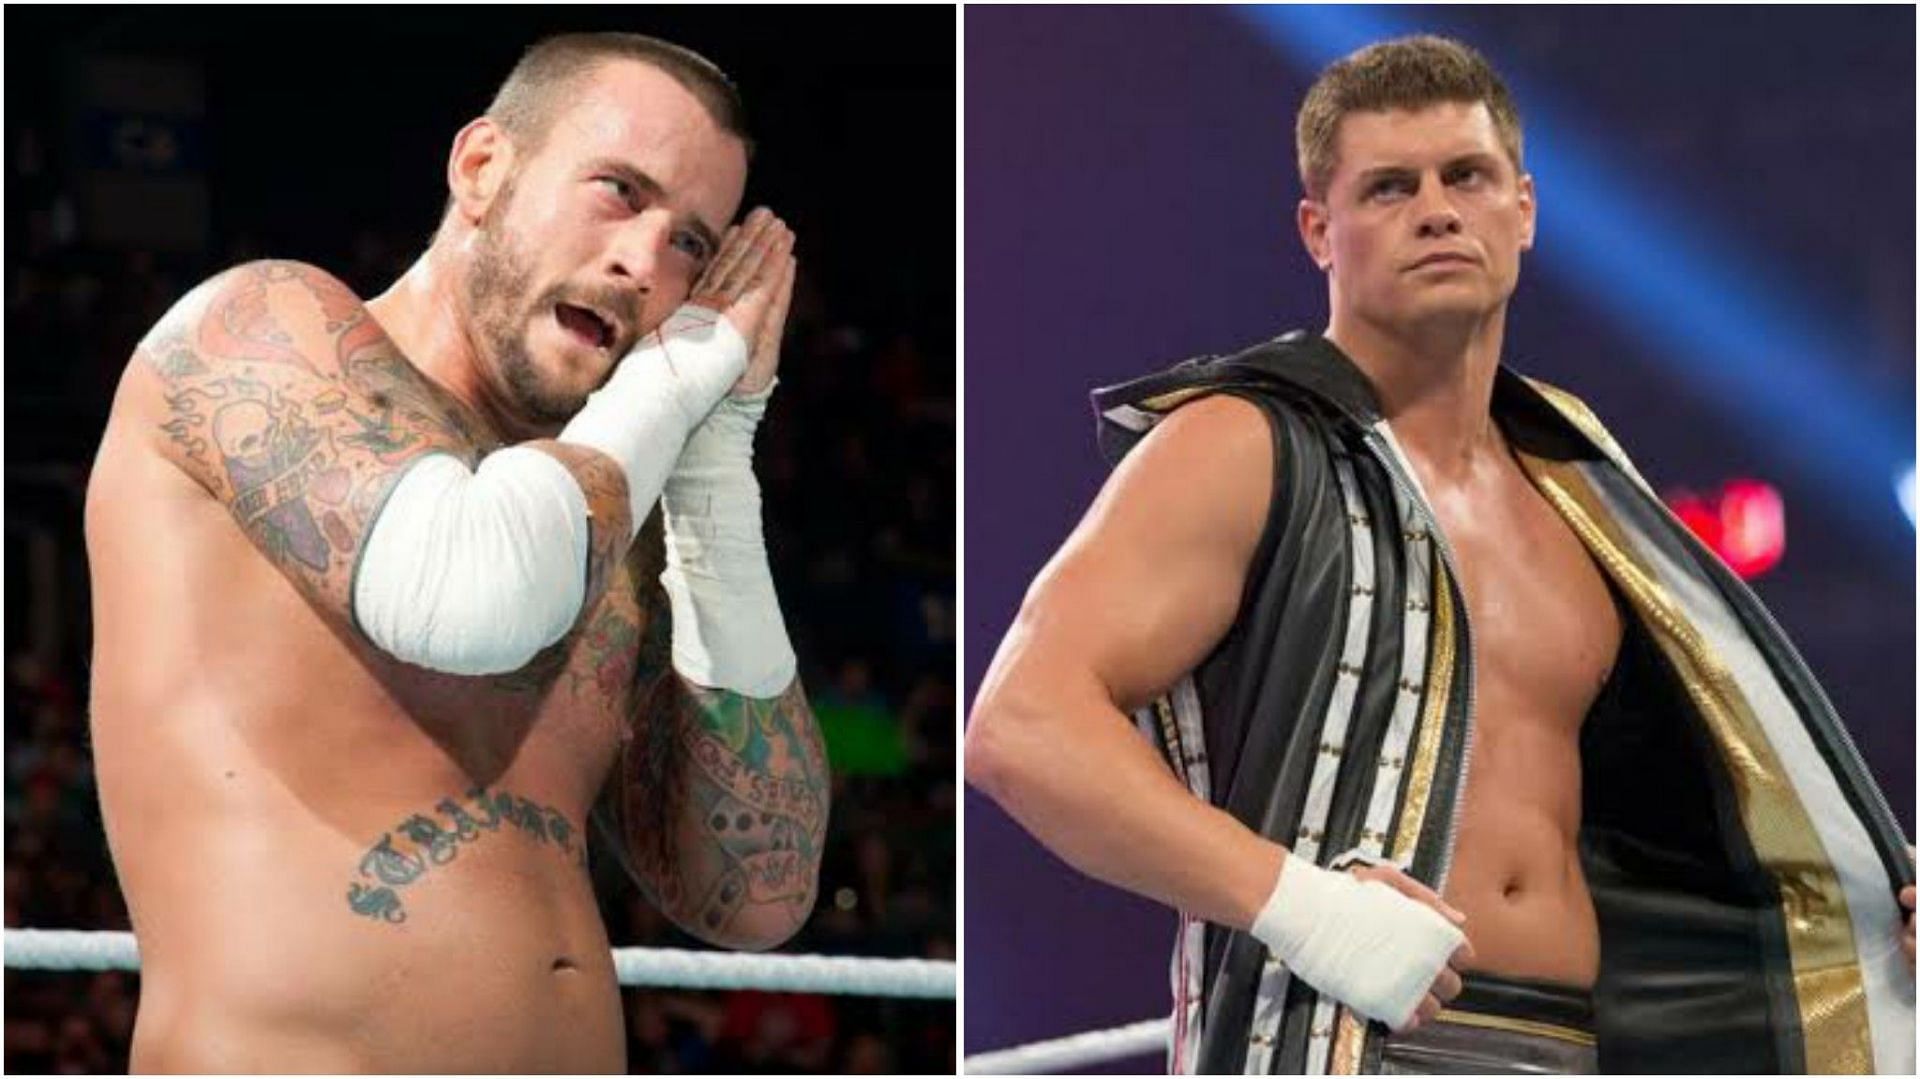 Cody Rhodes and CM Punk are currently part of AEW.